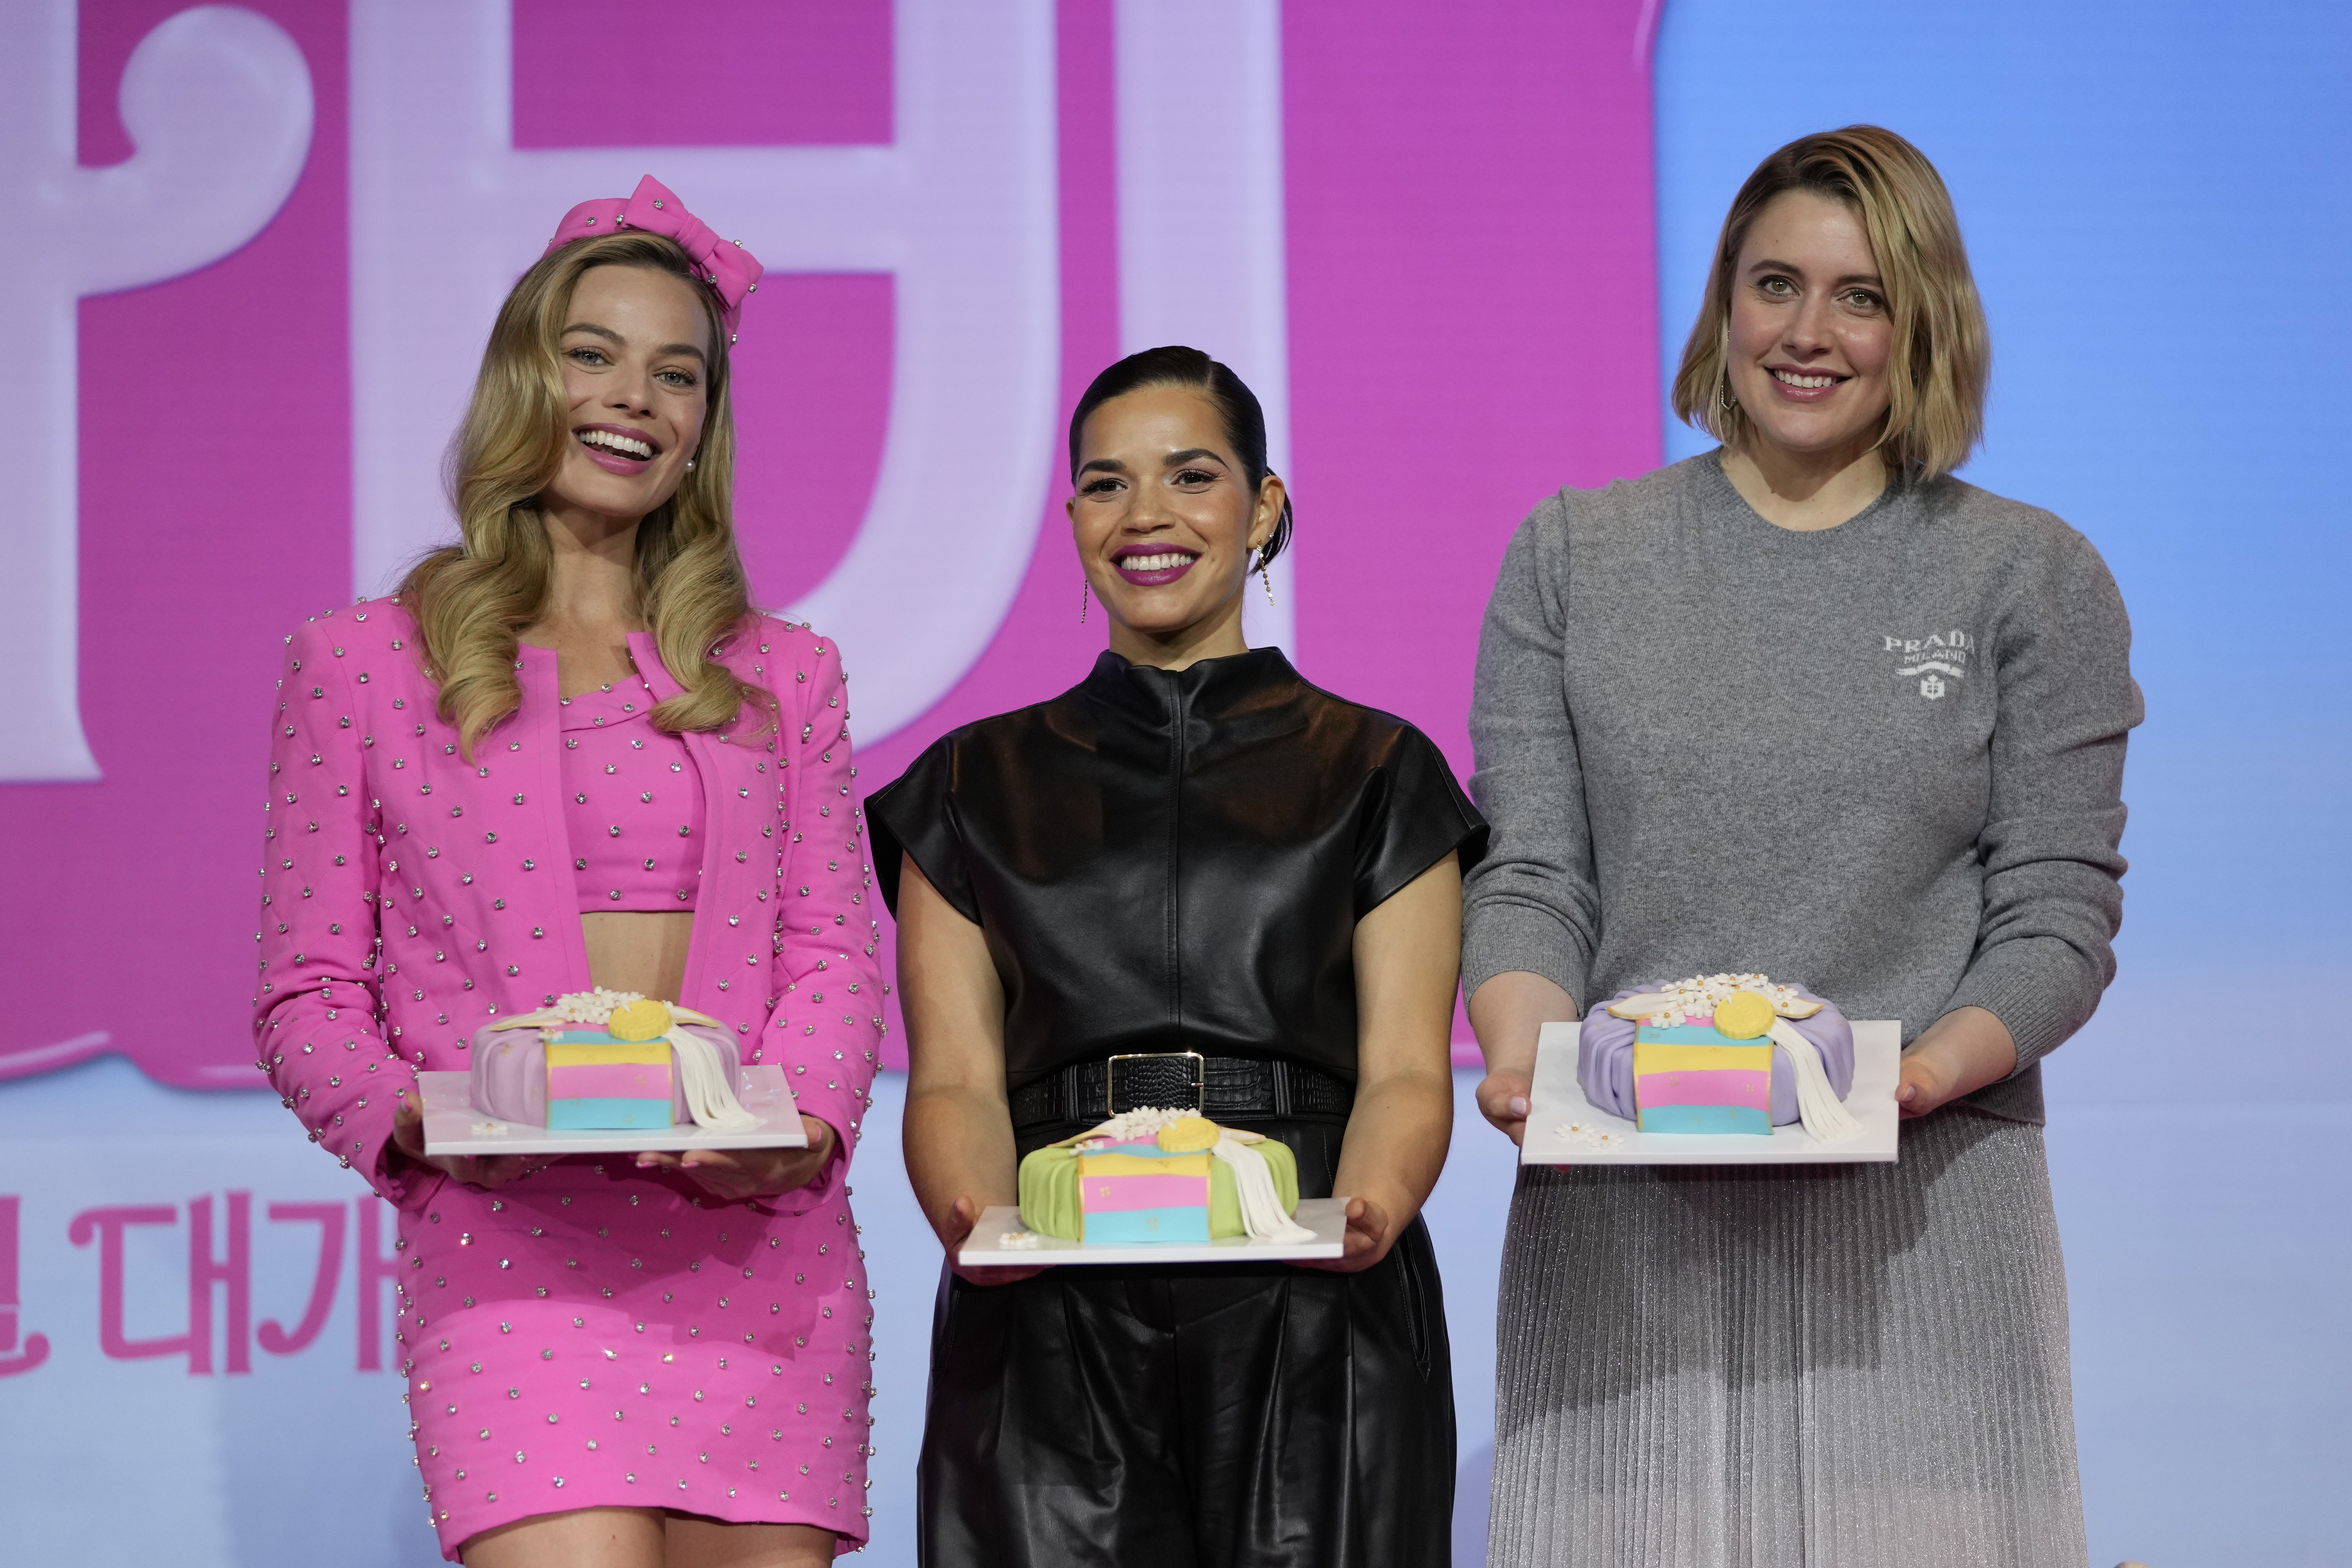 Cast members Margot Robbie, America Ferrera, and director Greta Gerwig, from left to right, pose for the media after a news conference of the movie "Barbie." in Seoul, South Korea, Monday, July 3, 2023. The film is to be released in the country on July 19. (AP Photo/Lee Jin-man)